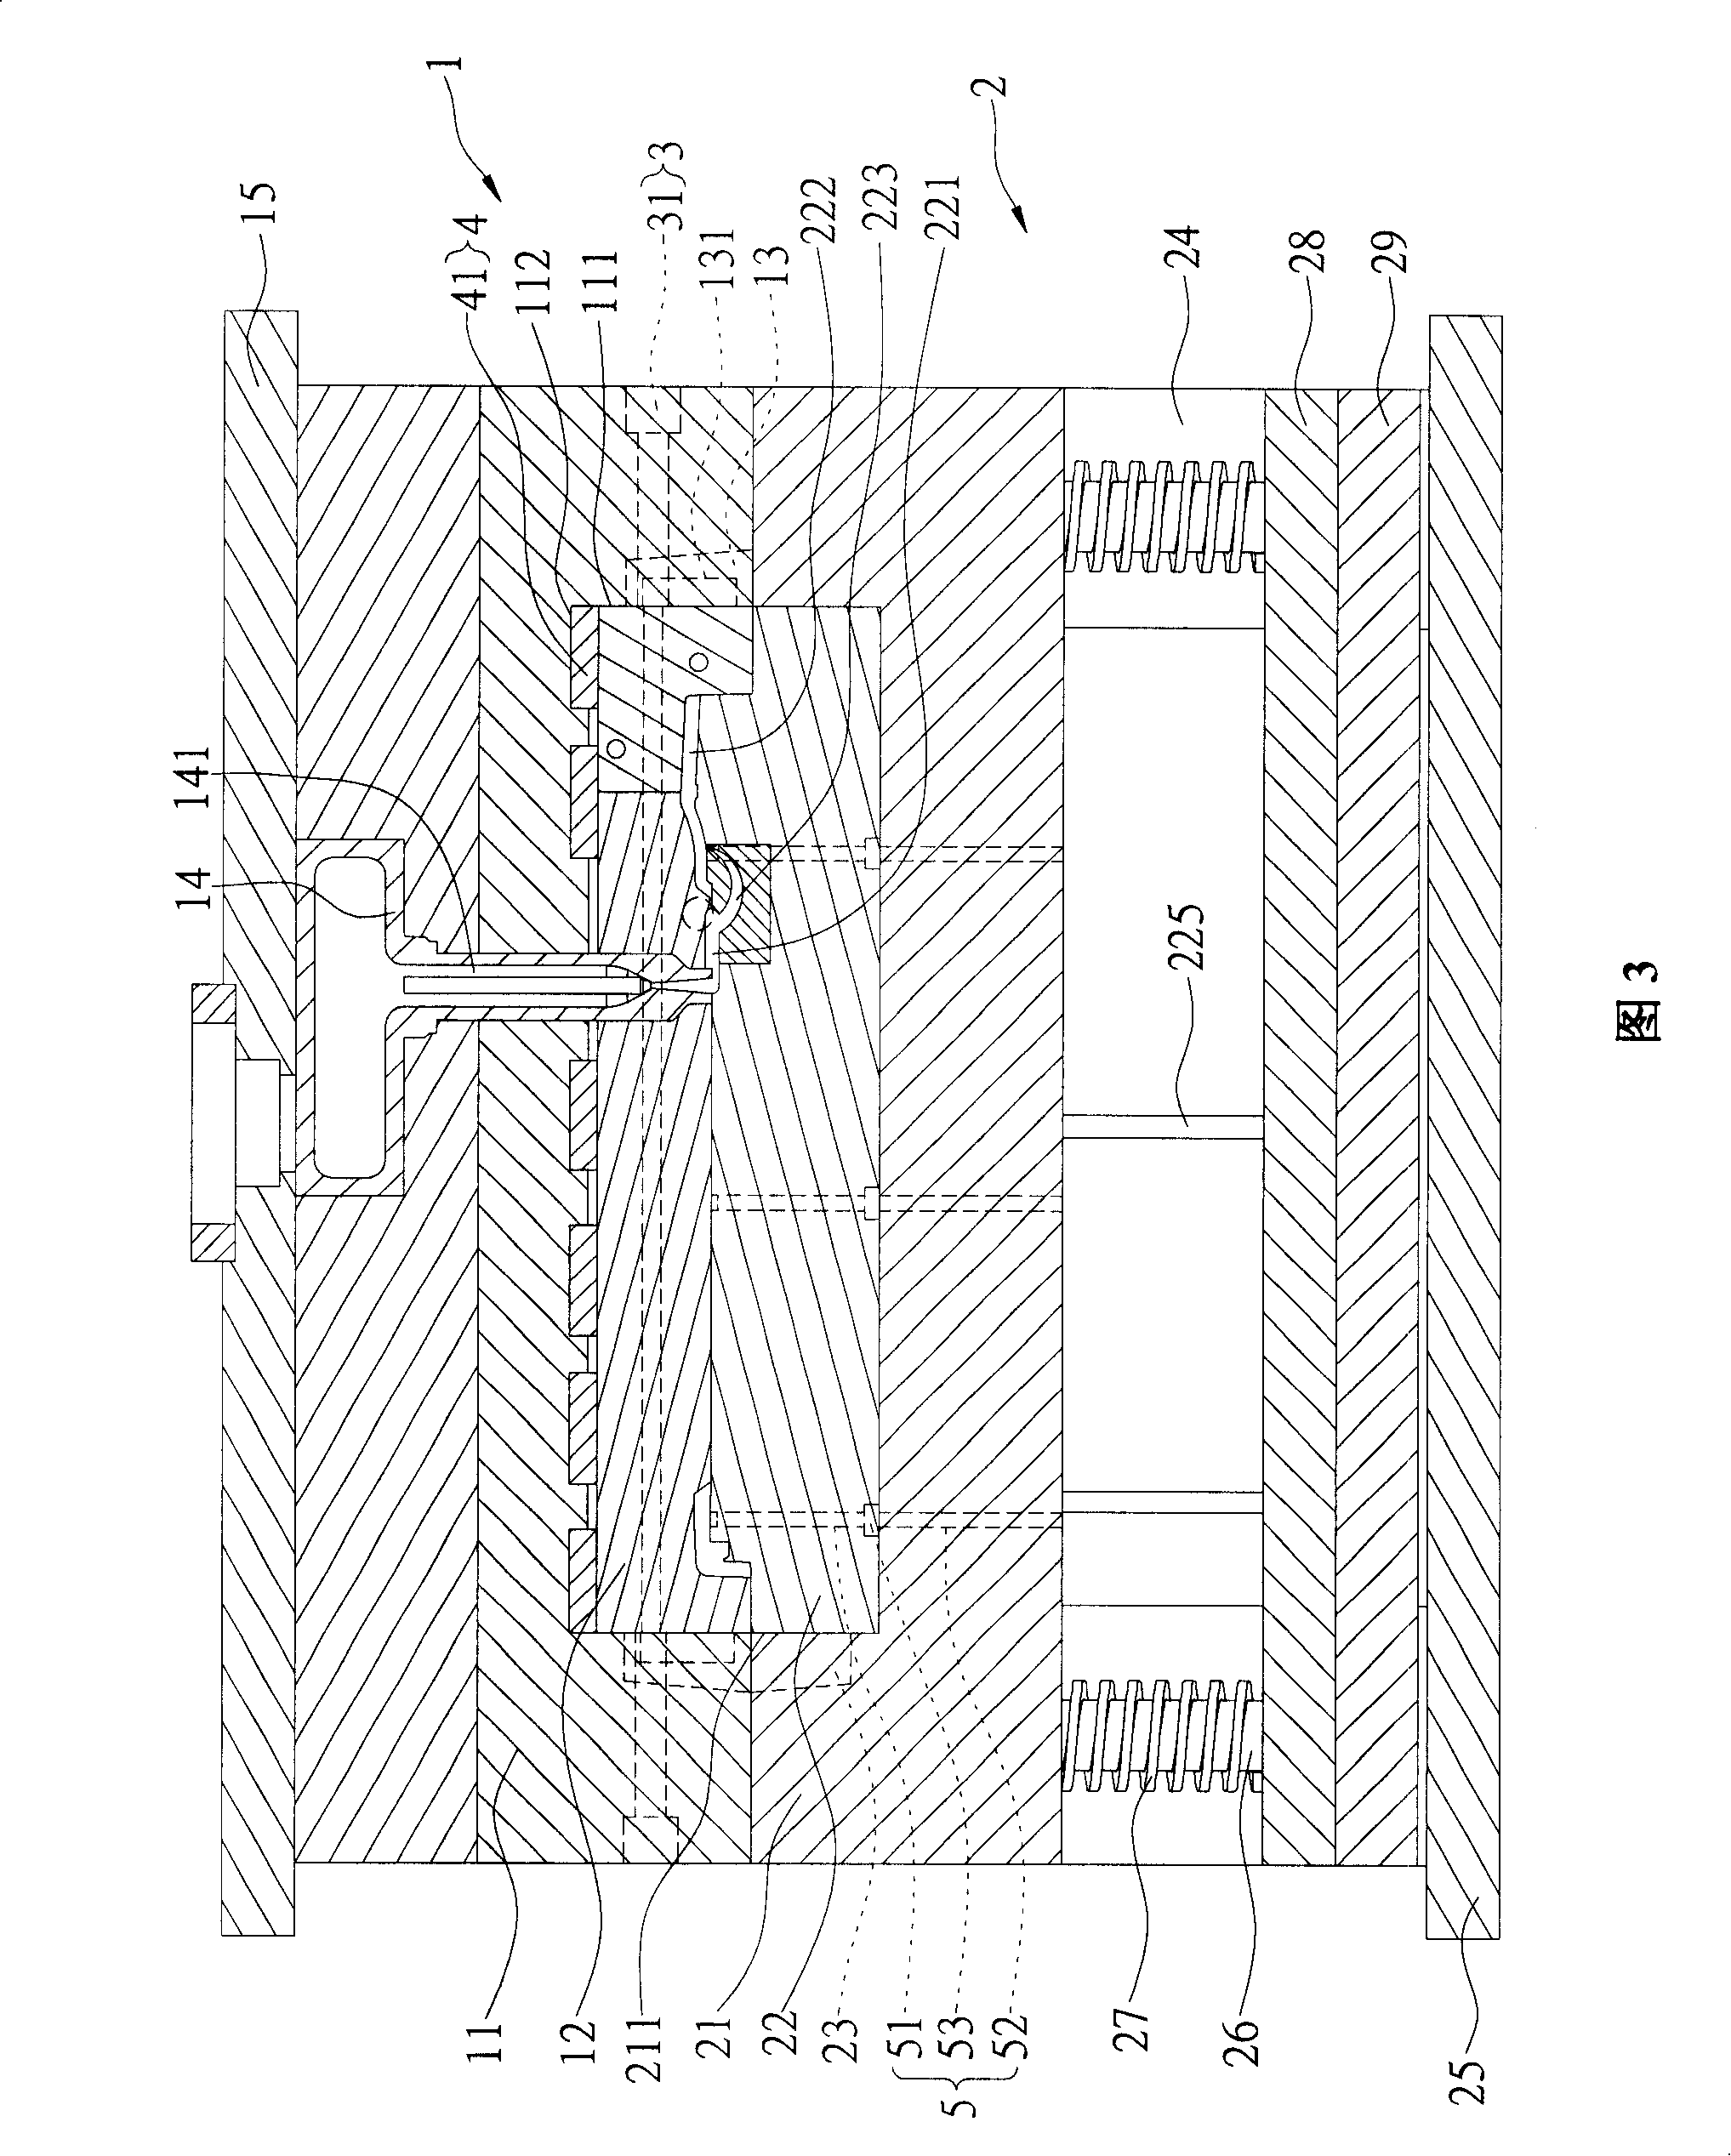 Mold structure and ejection shaping method